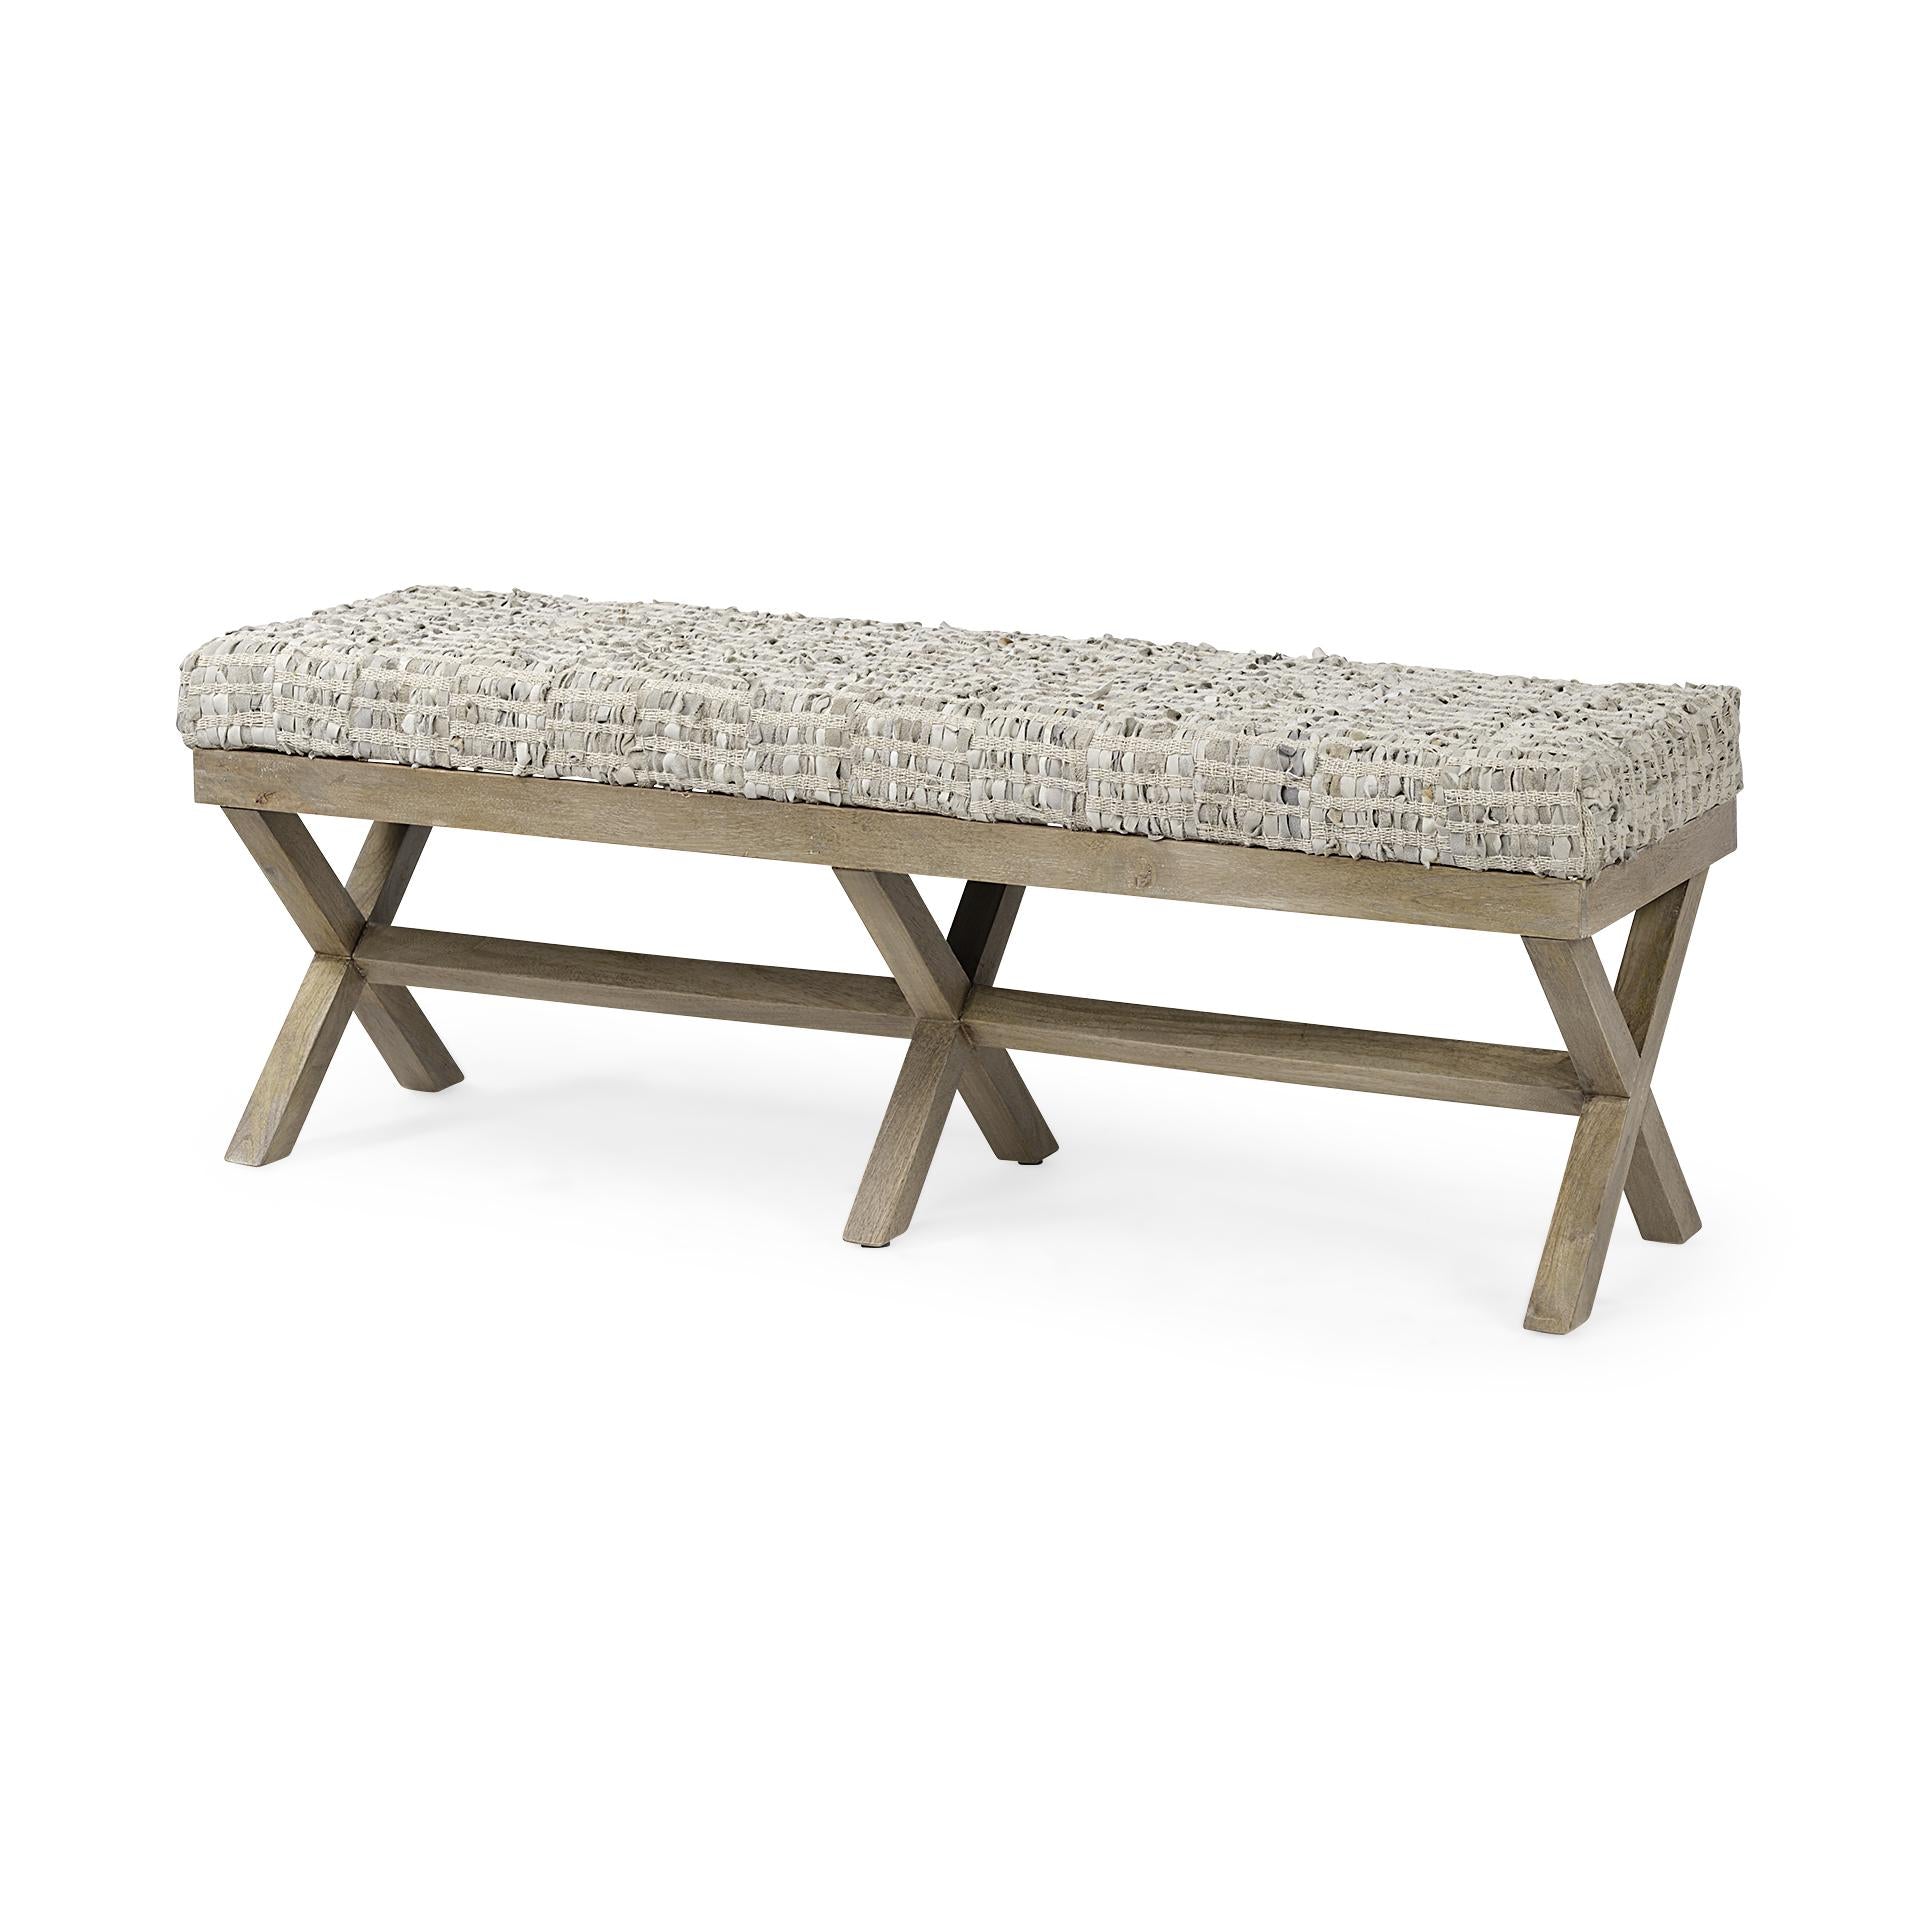 Rectangular Indian Mango Wood Light Brown Base W Beige-Toned Woven Leather Cushion Accent Bench